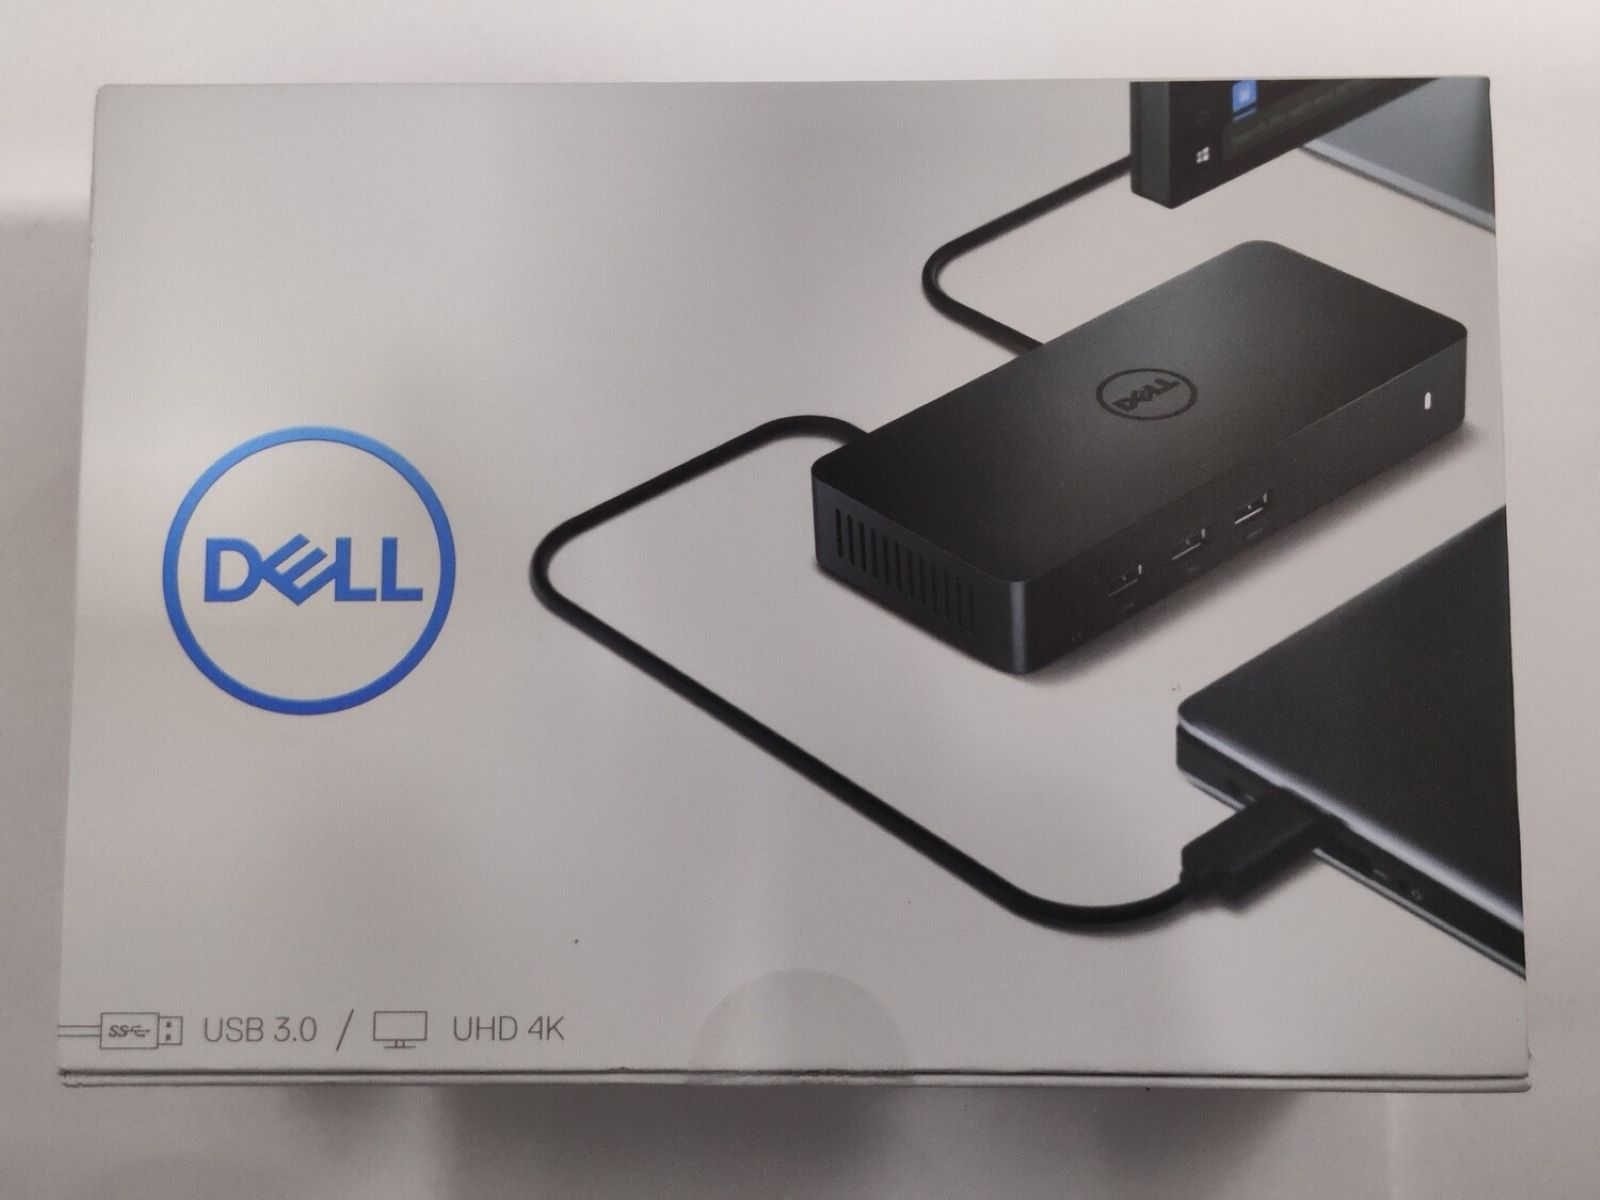 How To Update Dell Docking Station | CellularNews